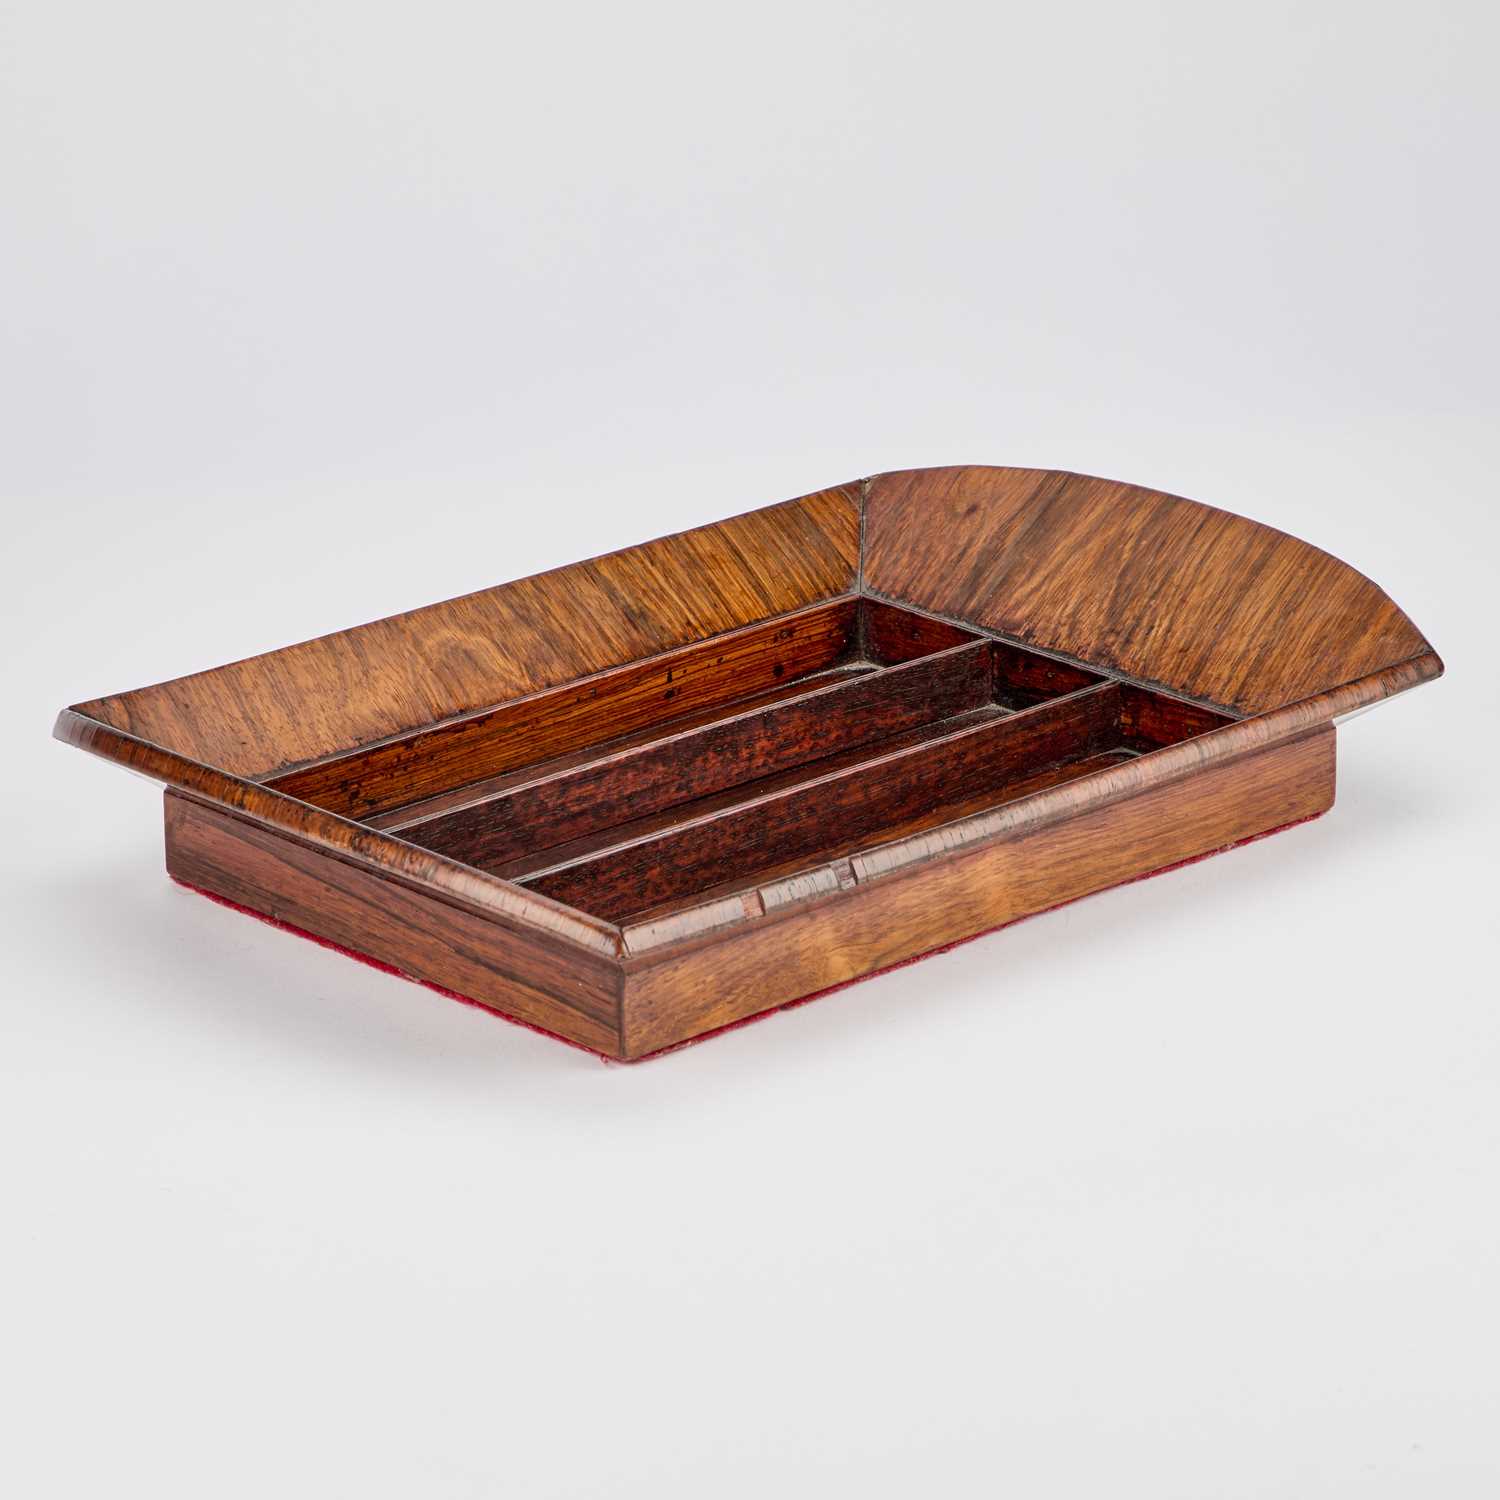 A 19TH CENTURY COUNTRY HOUSE ROSEWOOD TRAY - Image 2 of 2